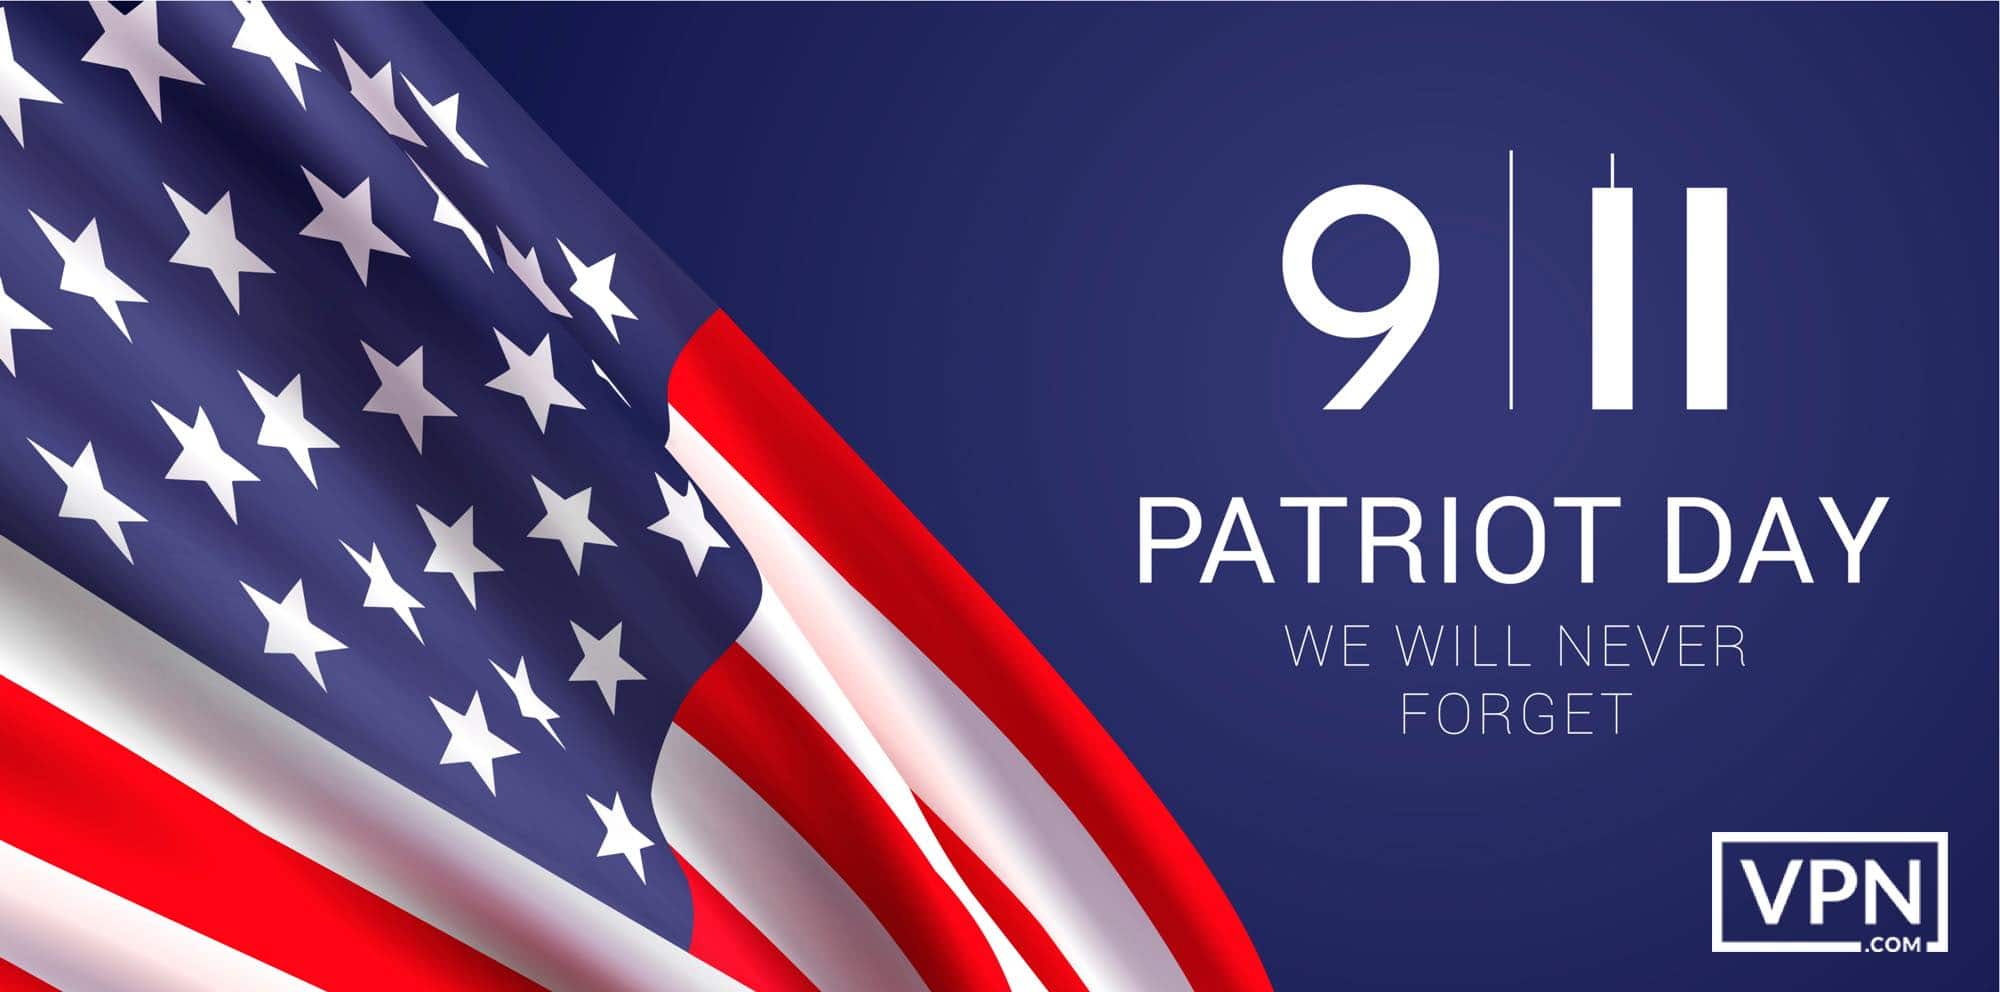 911-patriot-day-we-will-never-forget-vpn